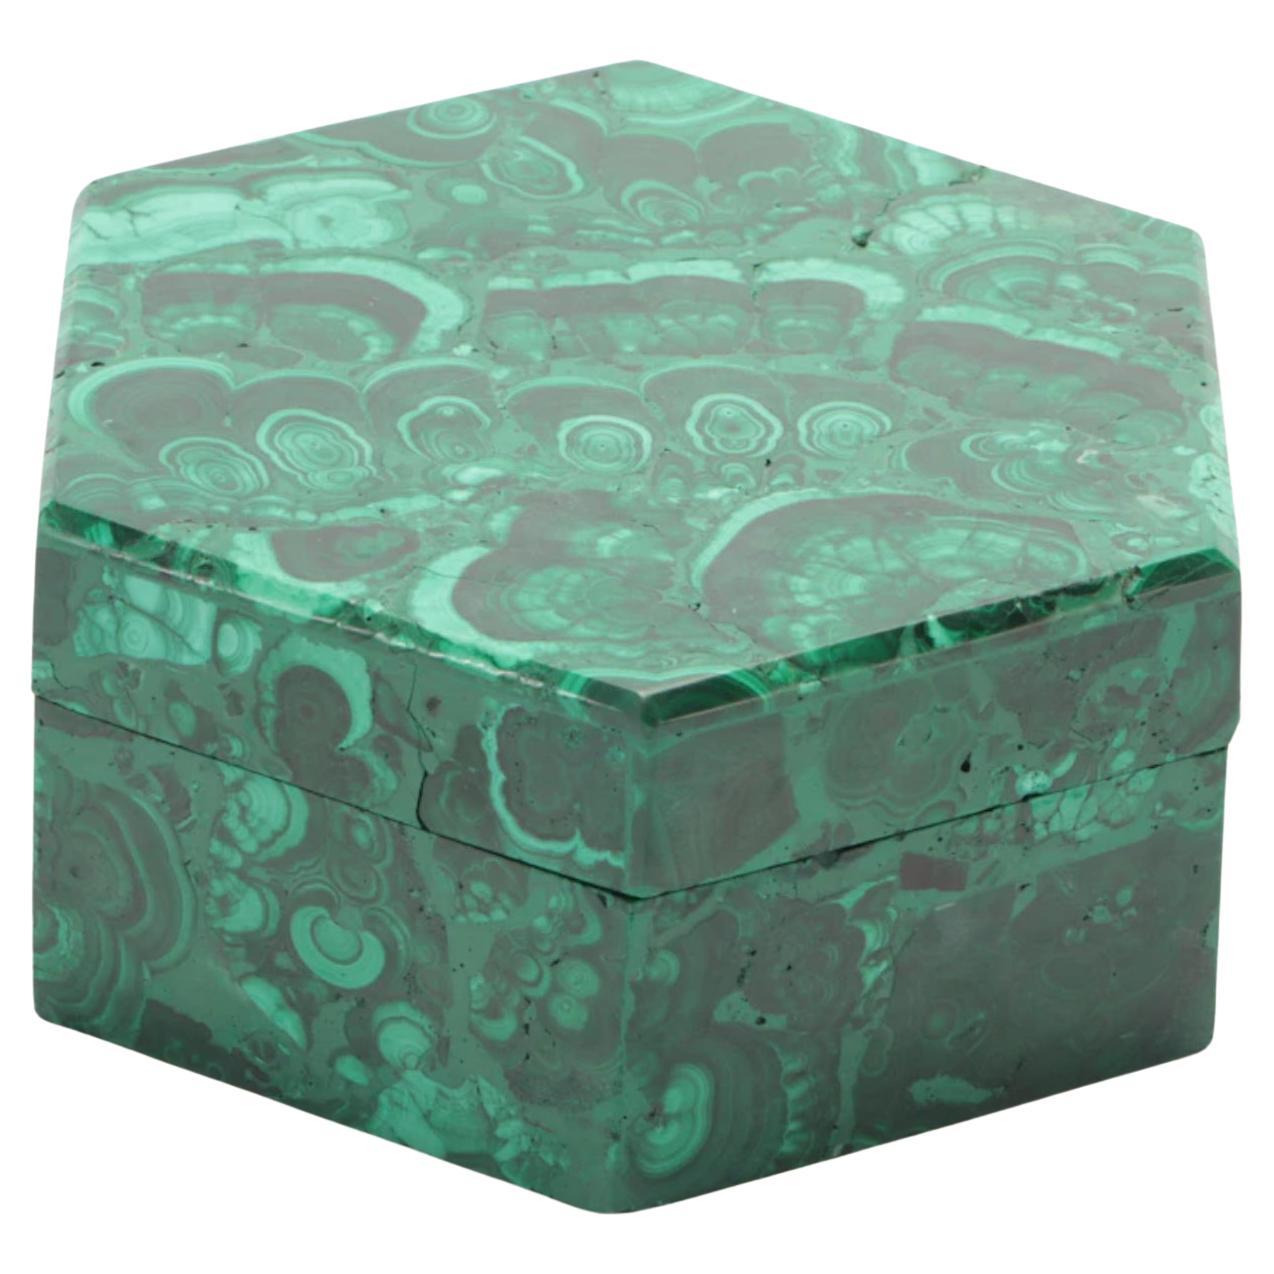 Gemstone quality lidded Malachite box. Hand carved and hand crafted with removable lid in a hexagonal shape. Beautiful patterns to the lid and box sides. Five inches wide and over five inches deep with a height of over two inches. Great jewelry or